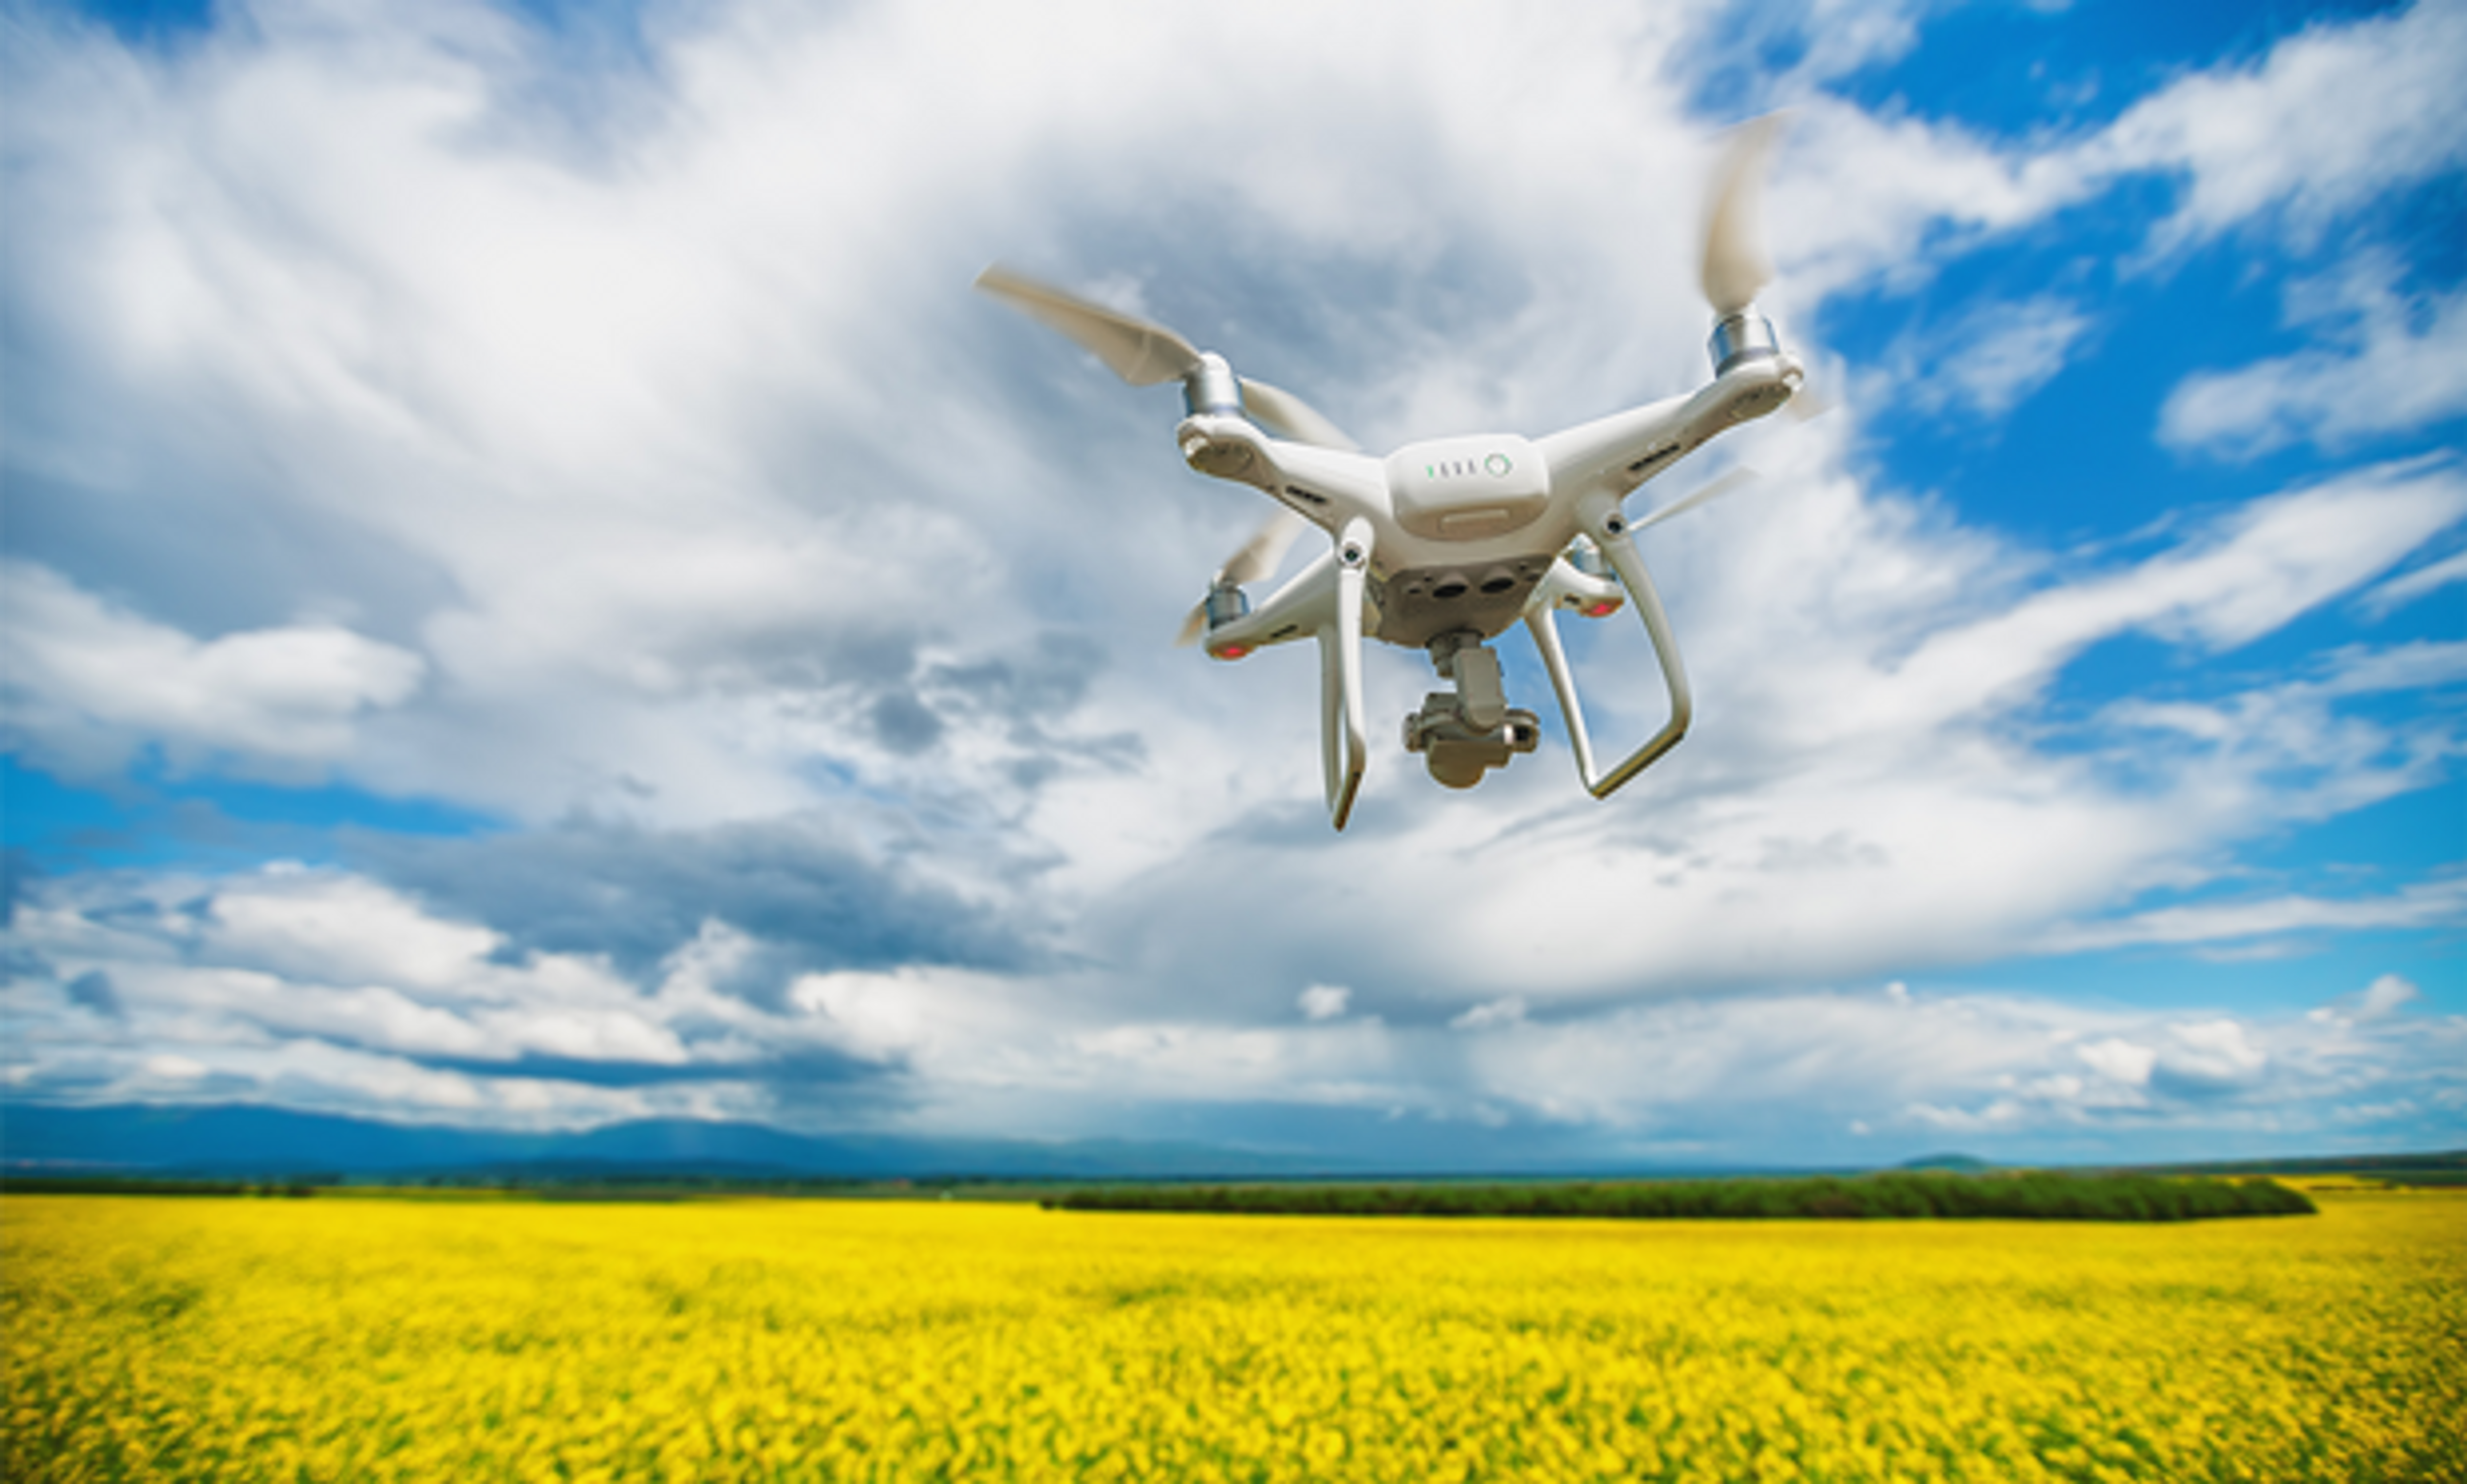 Image of a drone flying above a field